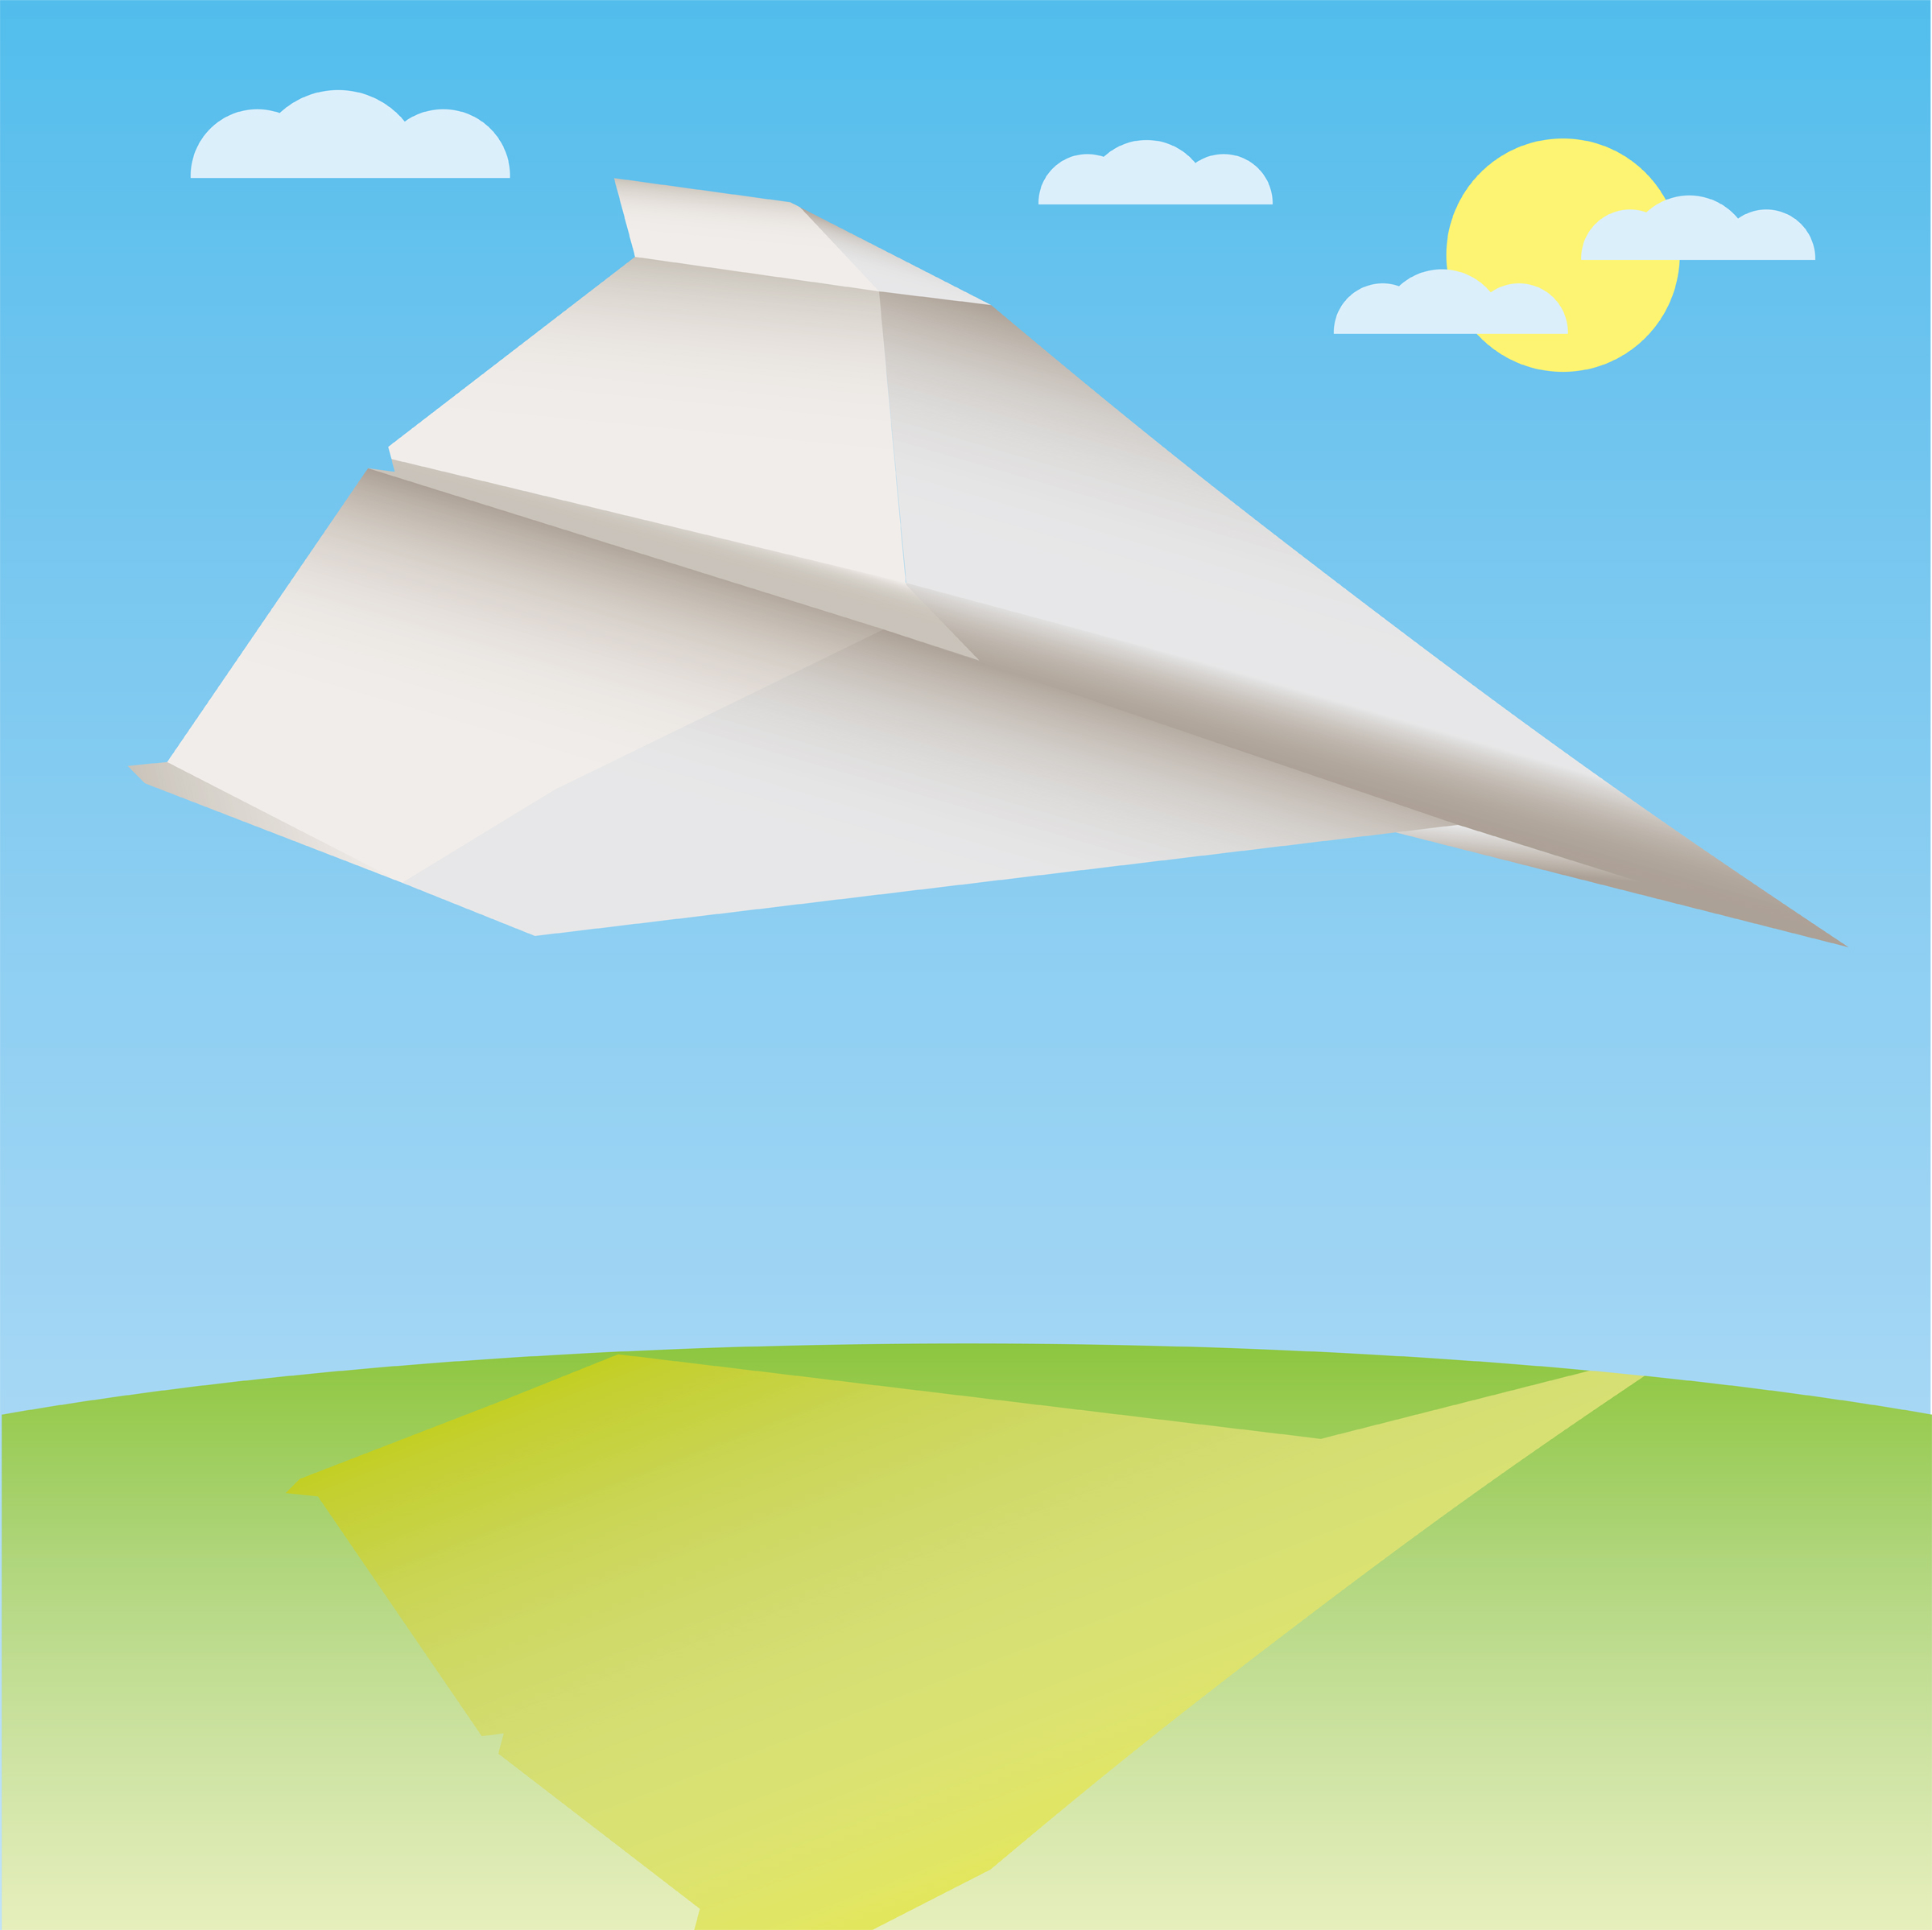 Paper airplane flying in the sky.